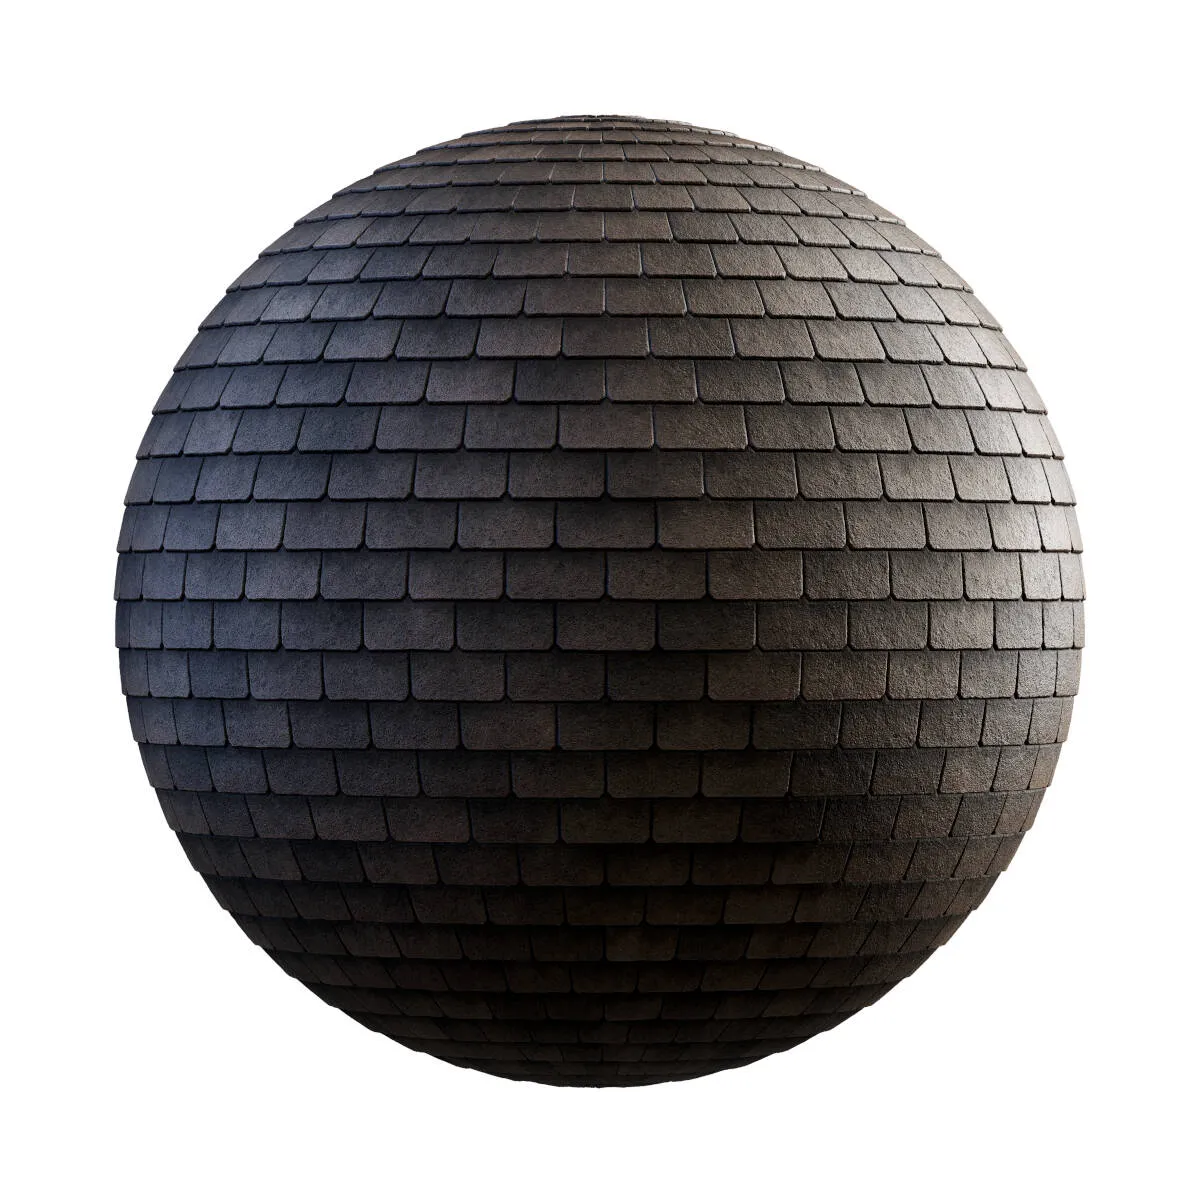 PBR Textures Volume 35 – Roofs – 4K – brown_shingle_roof_35_65